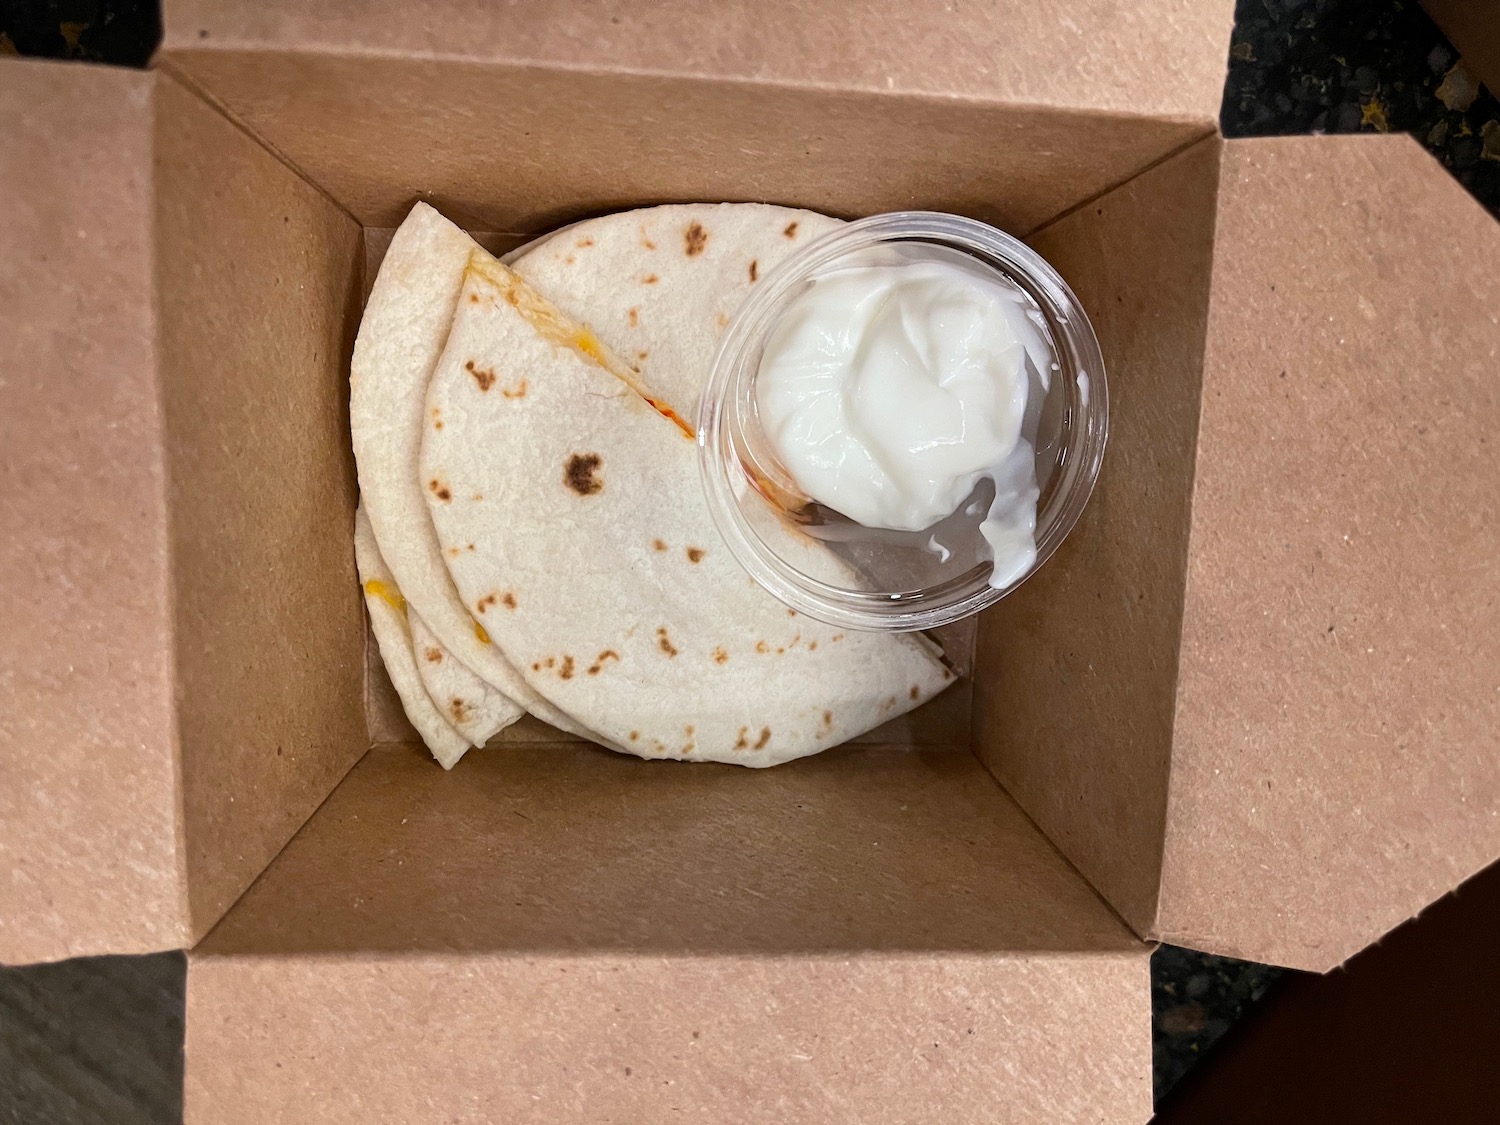 a box with tortillas and a container of yogurt